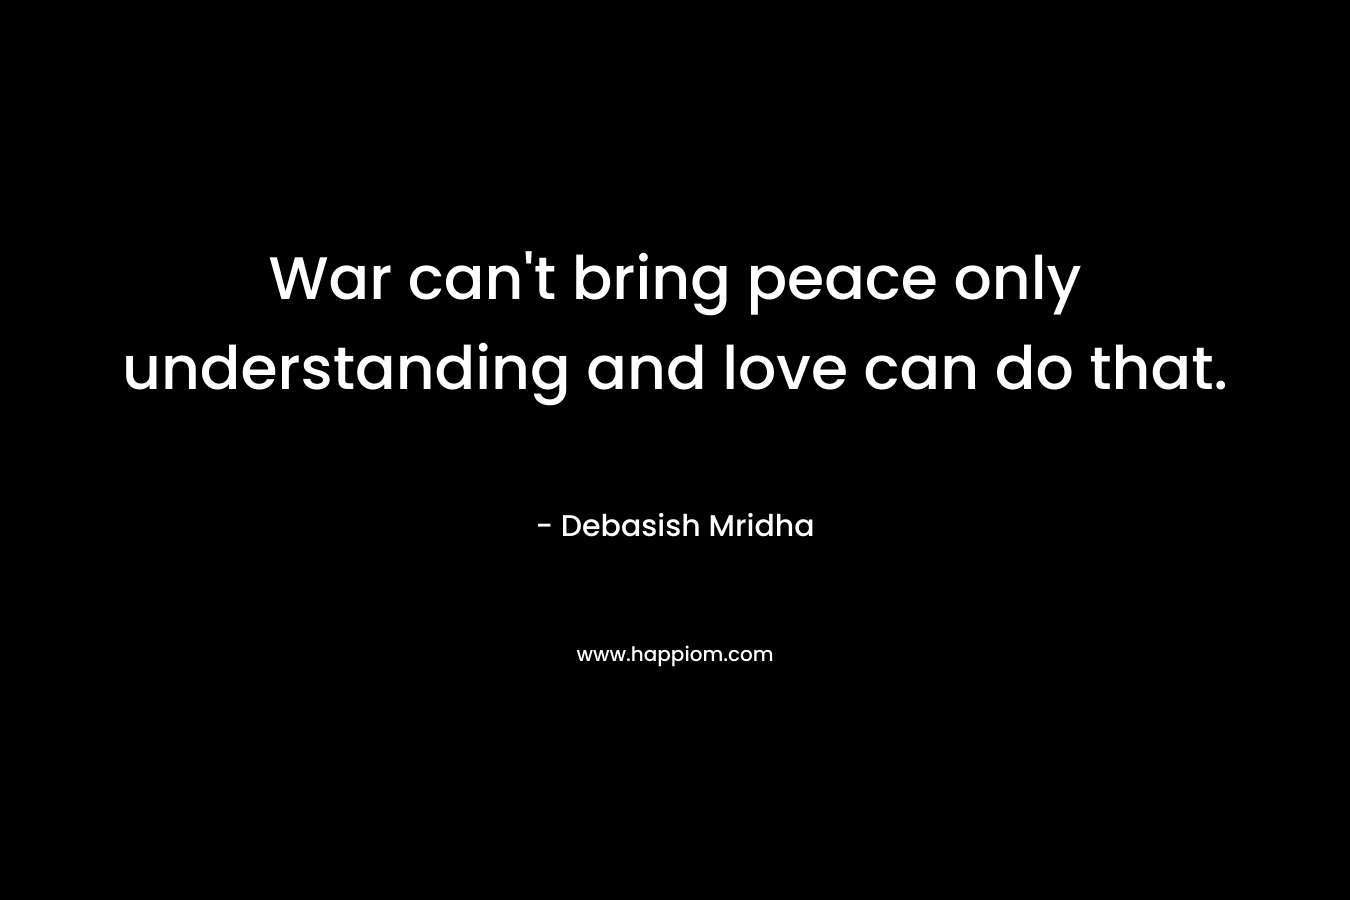 War can't bring peace only understanding and love can do that.